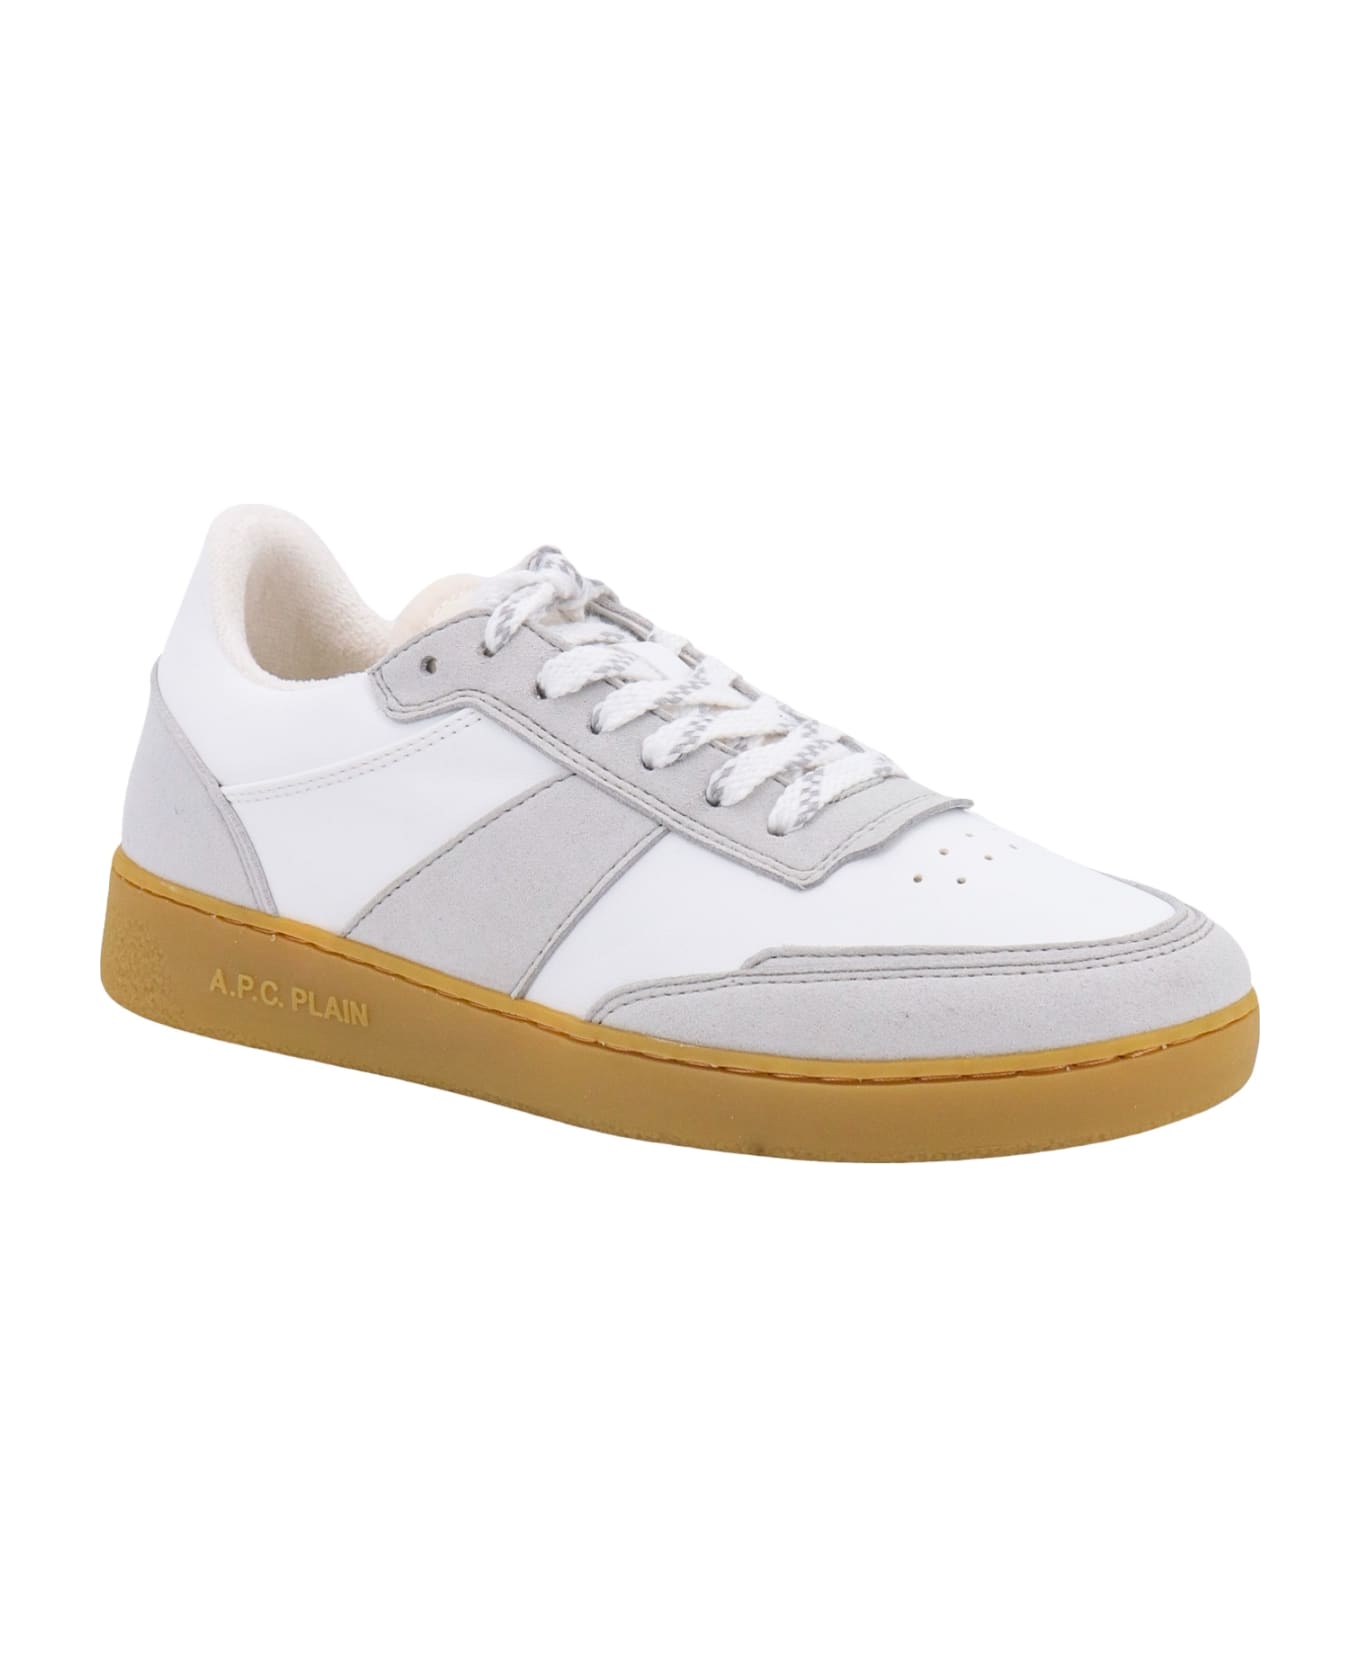 A.P.C. Sneakers - White スニーカー